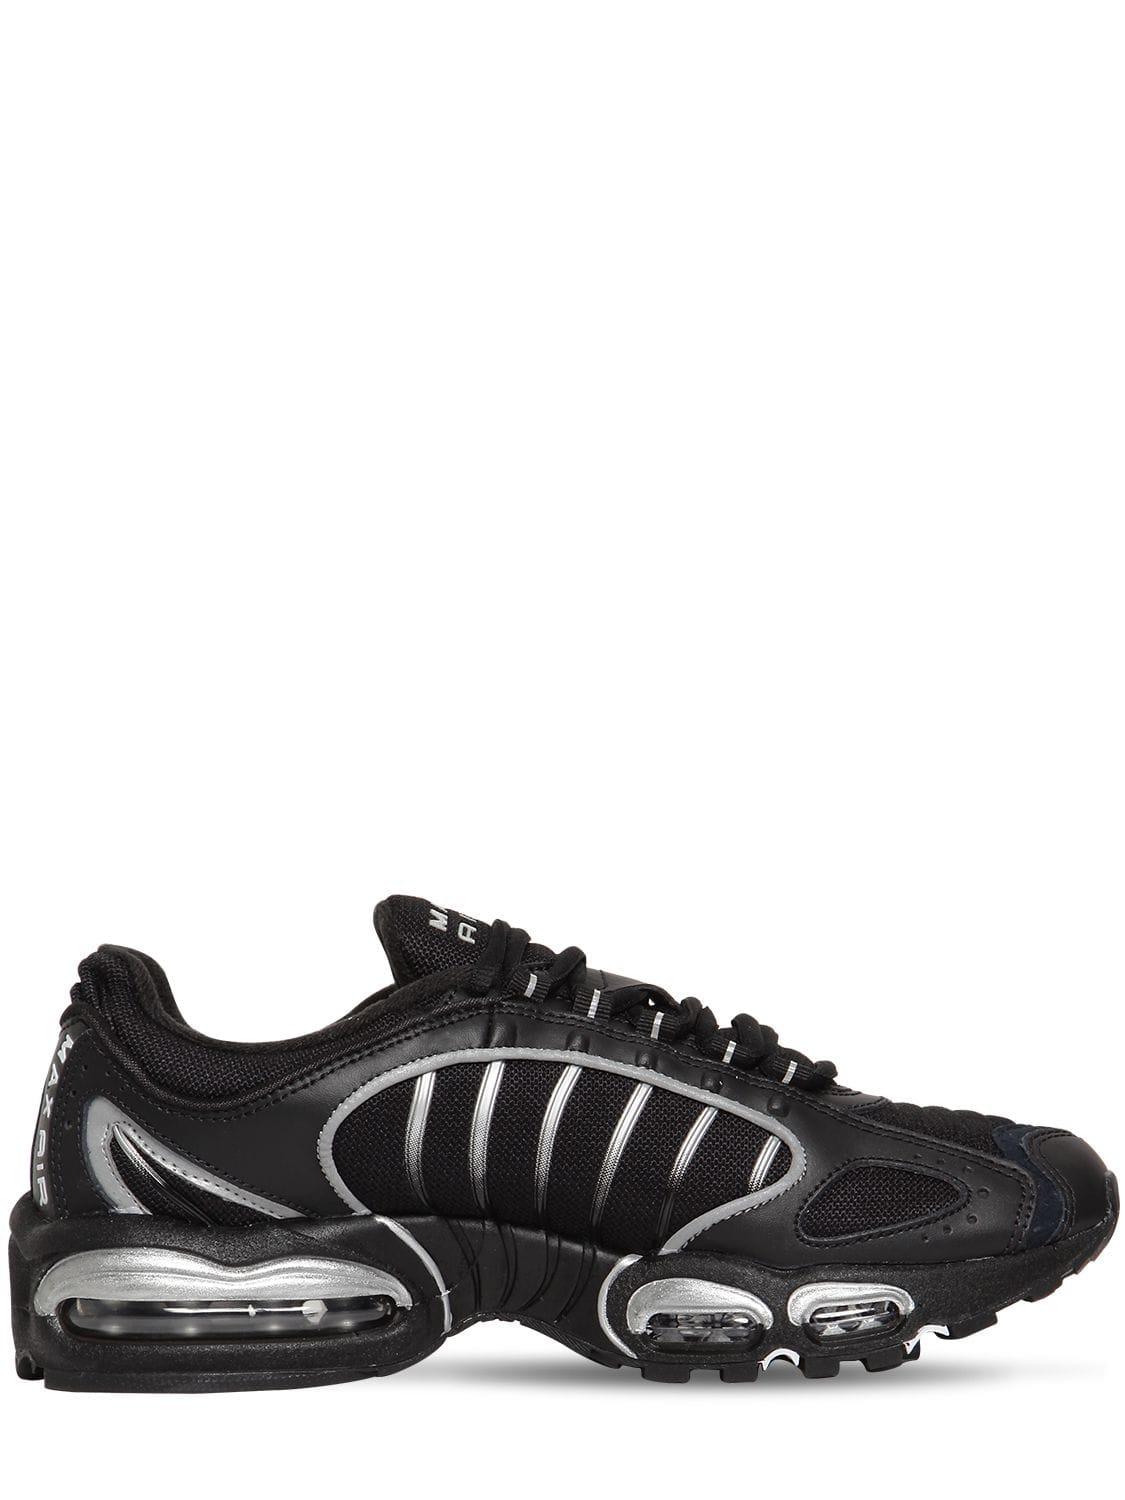 Nike Air Max Tailwind Iv Sneakers in Black (White) for Men - Save 71% |  Lyst Australia